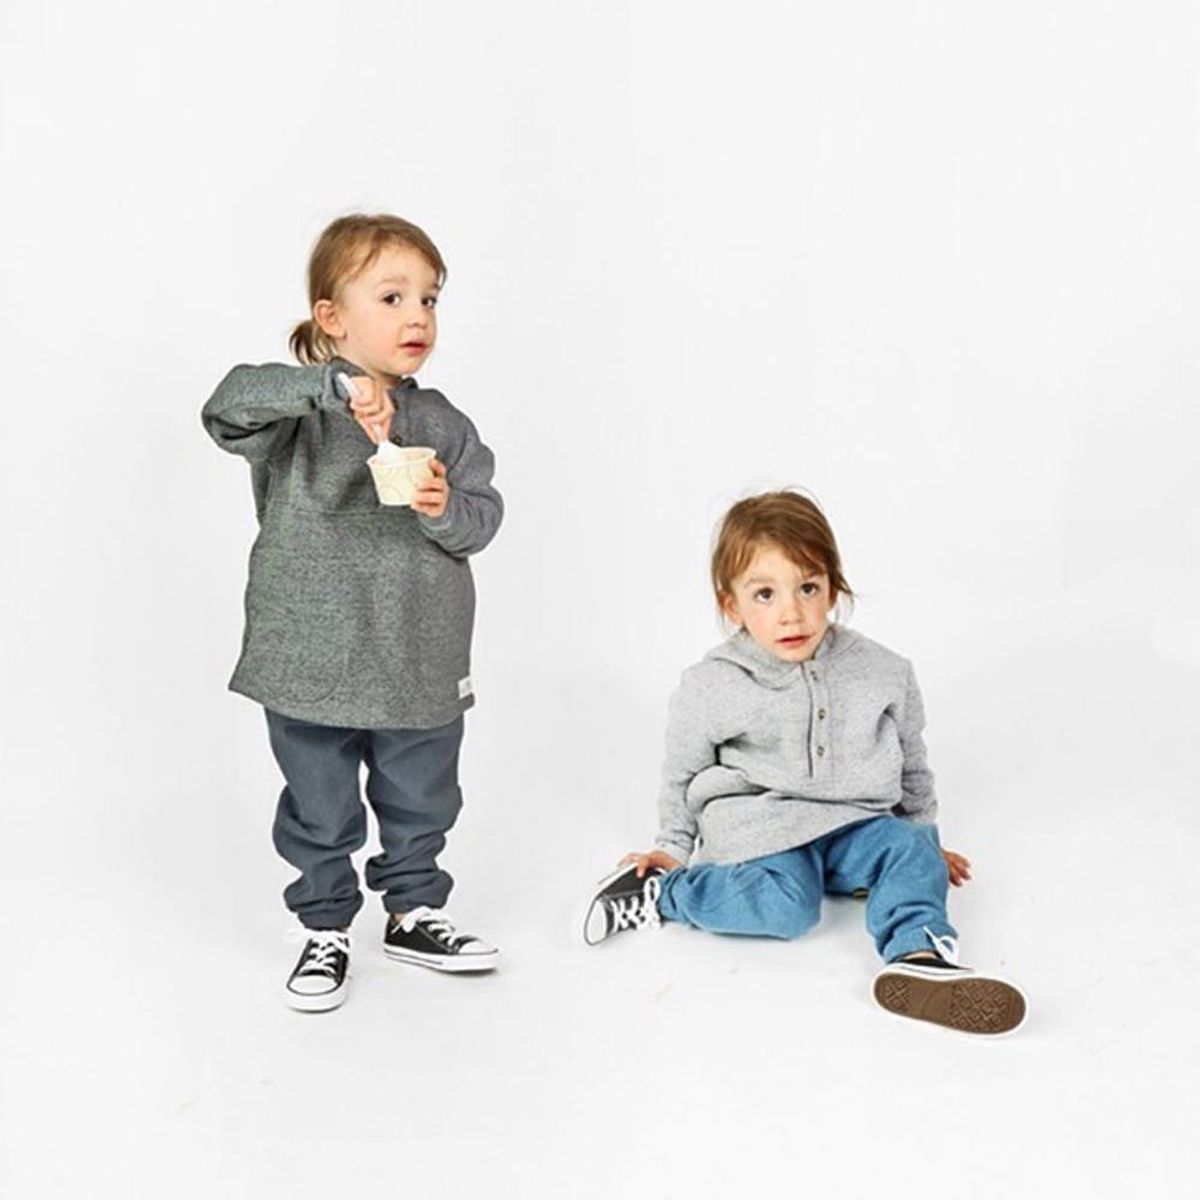 You’ll Wish You Could Wear This Stylin’ Gender Neutral Kids Clothing Line